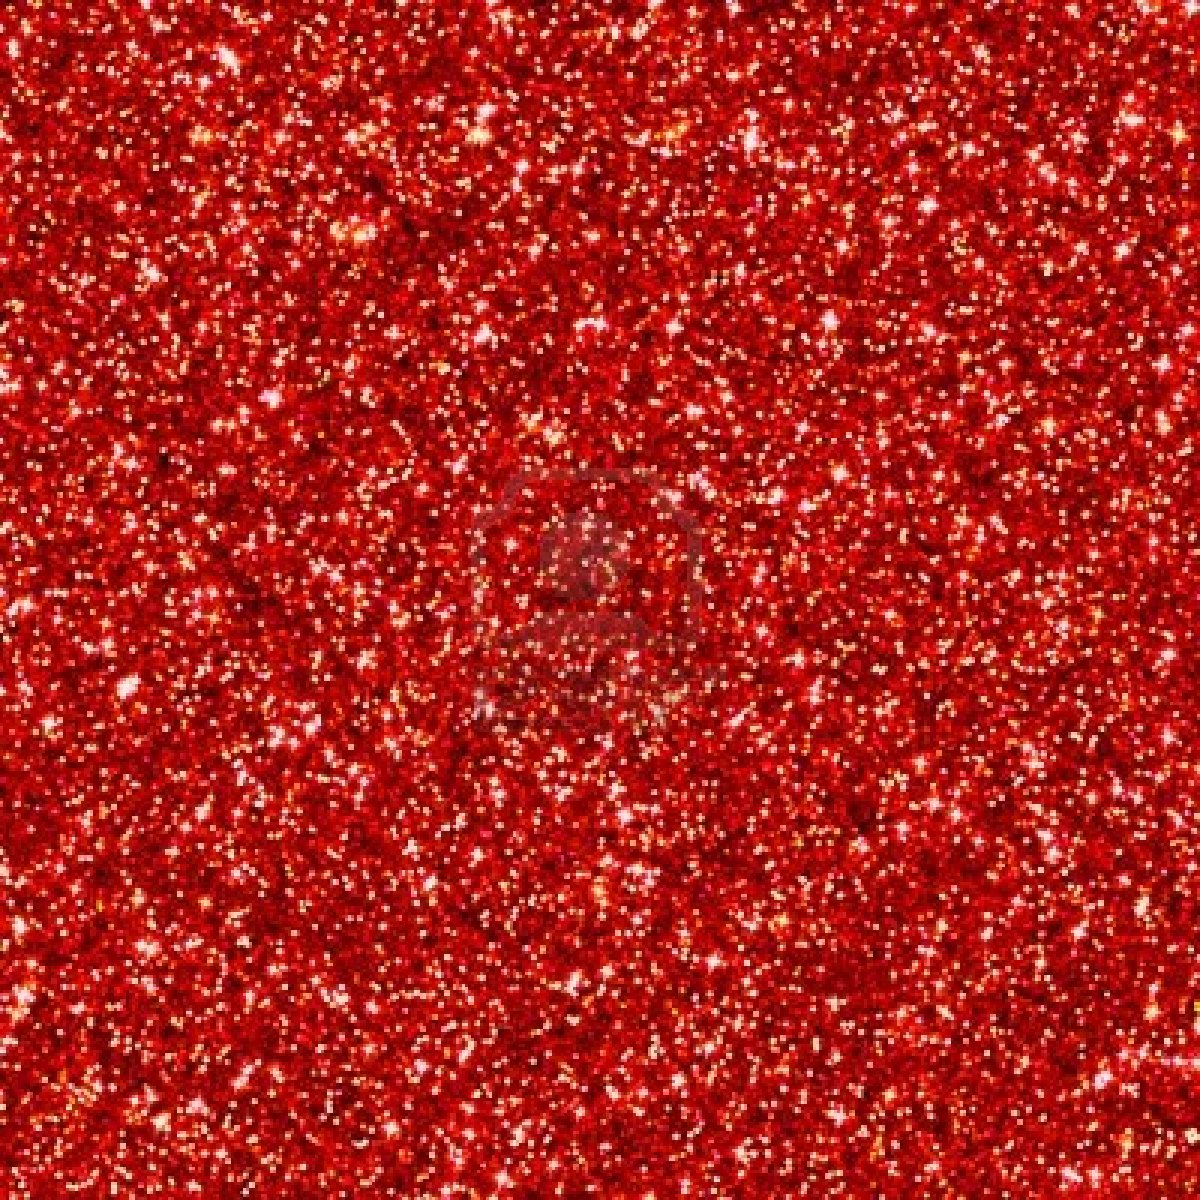 Related Red And Gold Background Dark Glitter